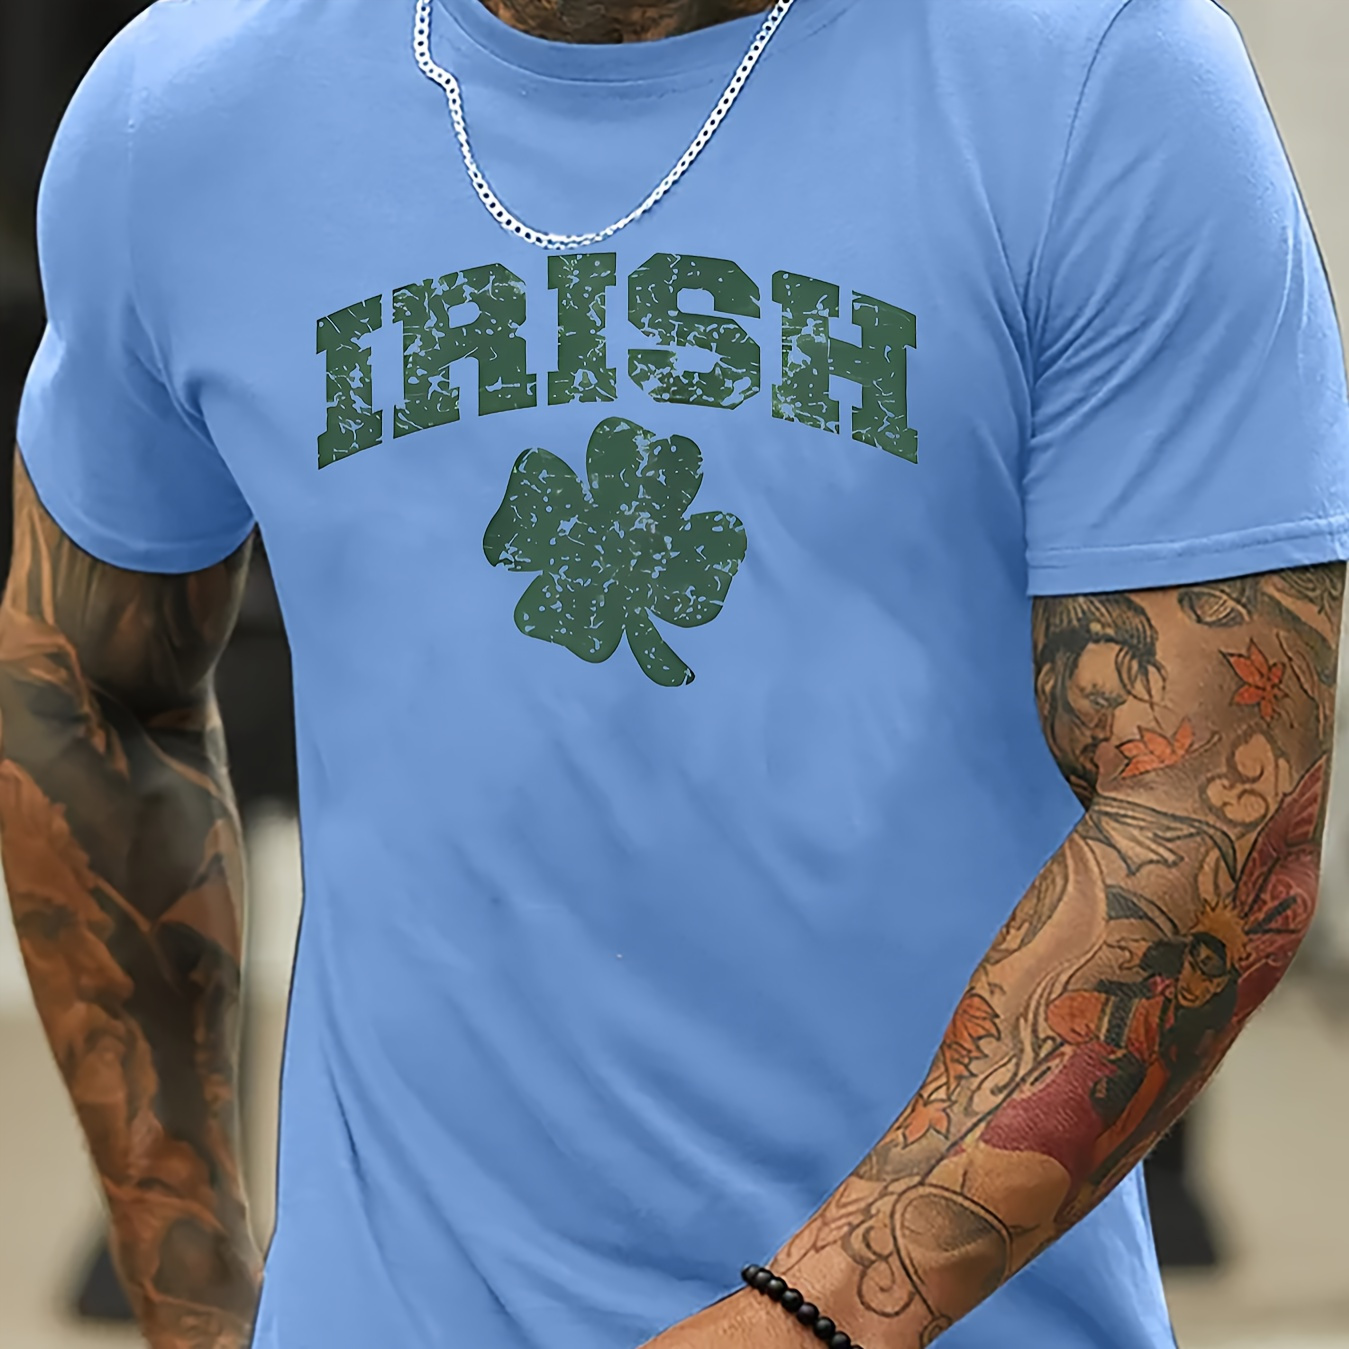 

St. Patrick's Day Irish Letter Graphic Print Men's Creative Top, Casual Short Sleeve Crew Neck T-shirt, Men's Clothing For Summer Outdoor